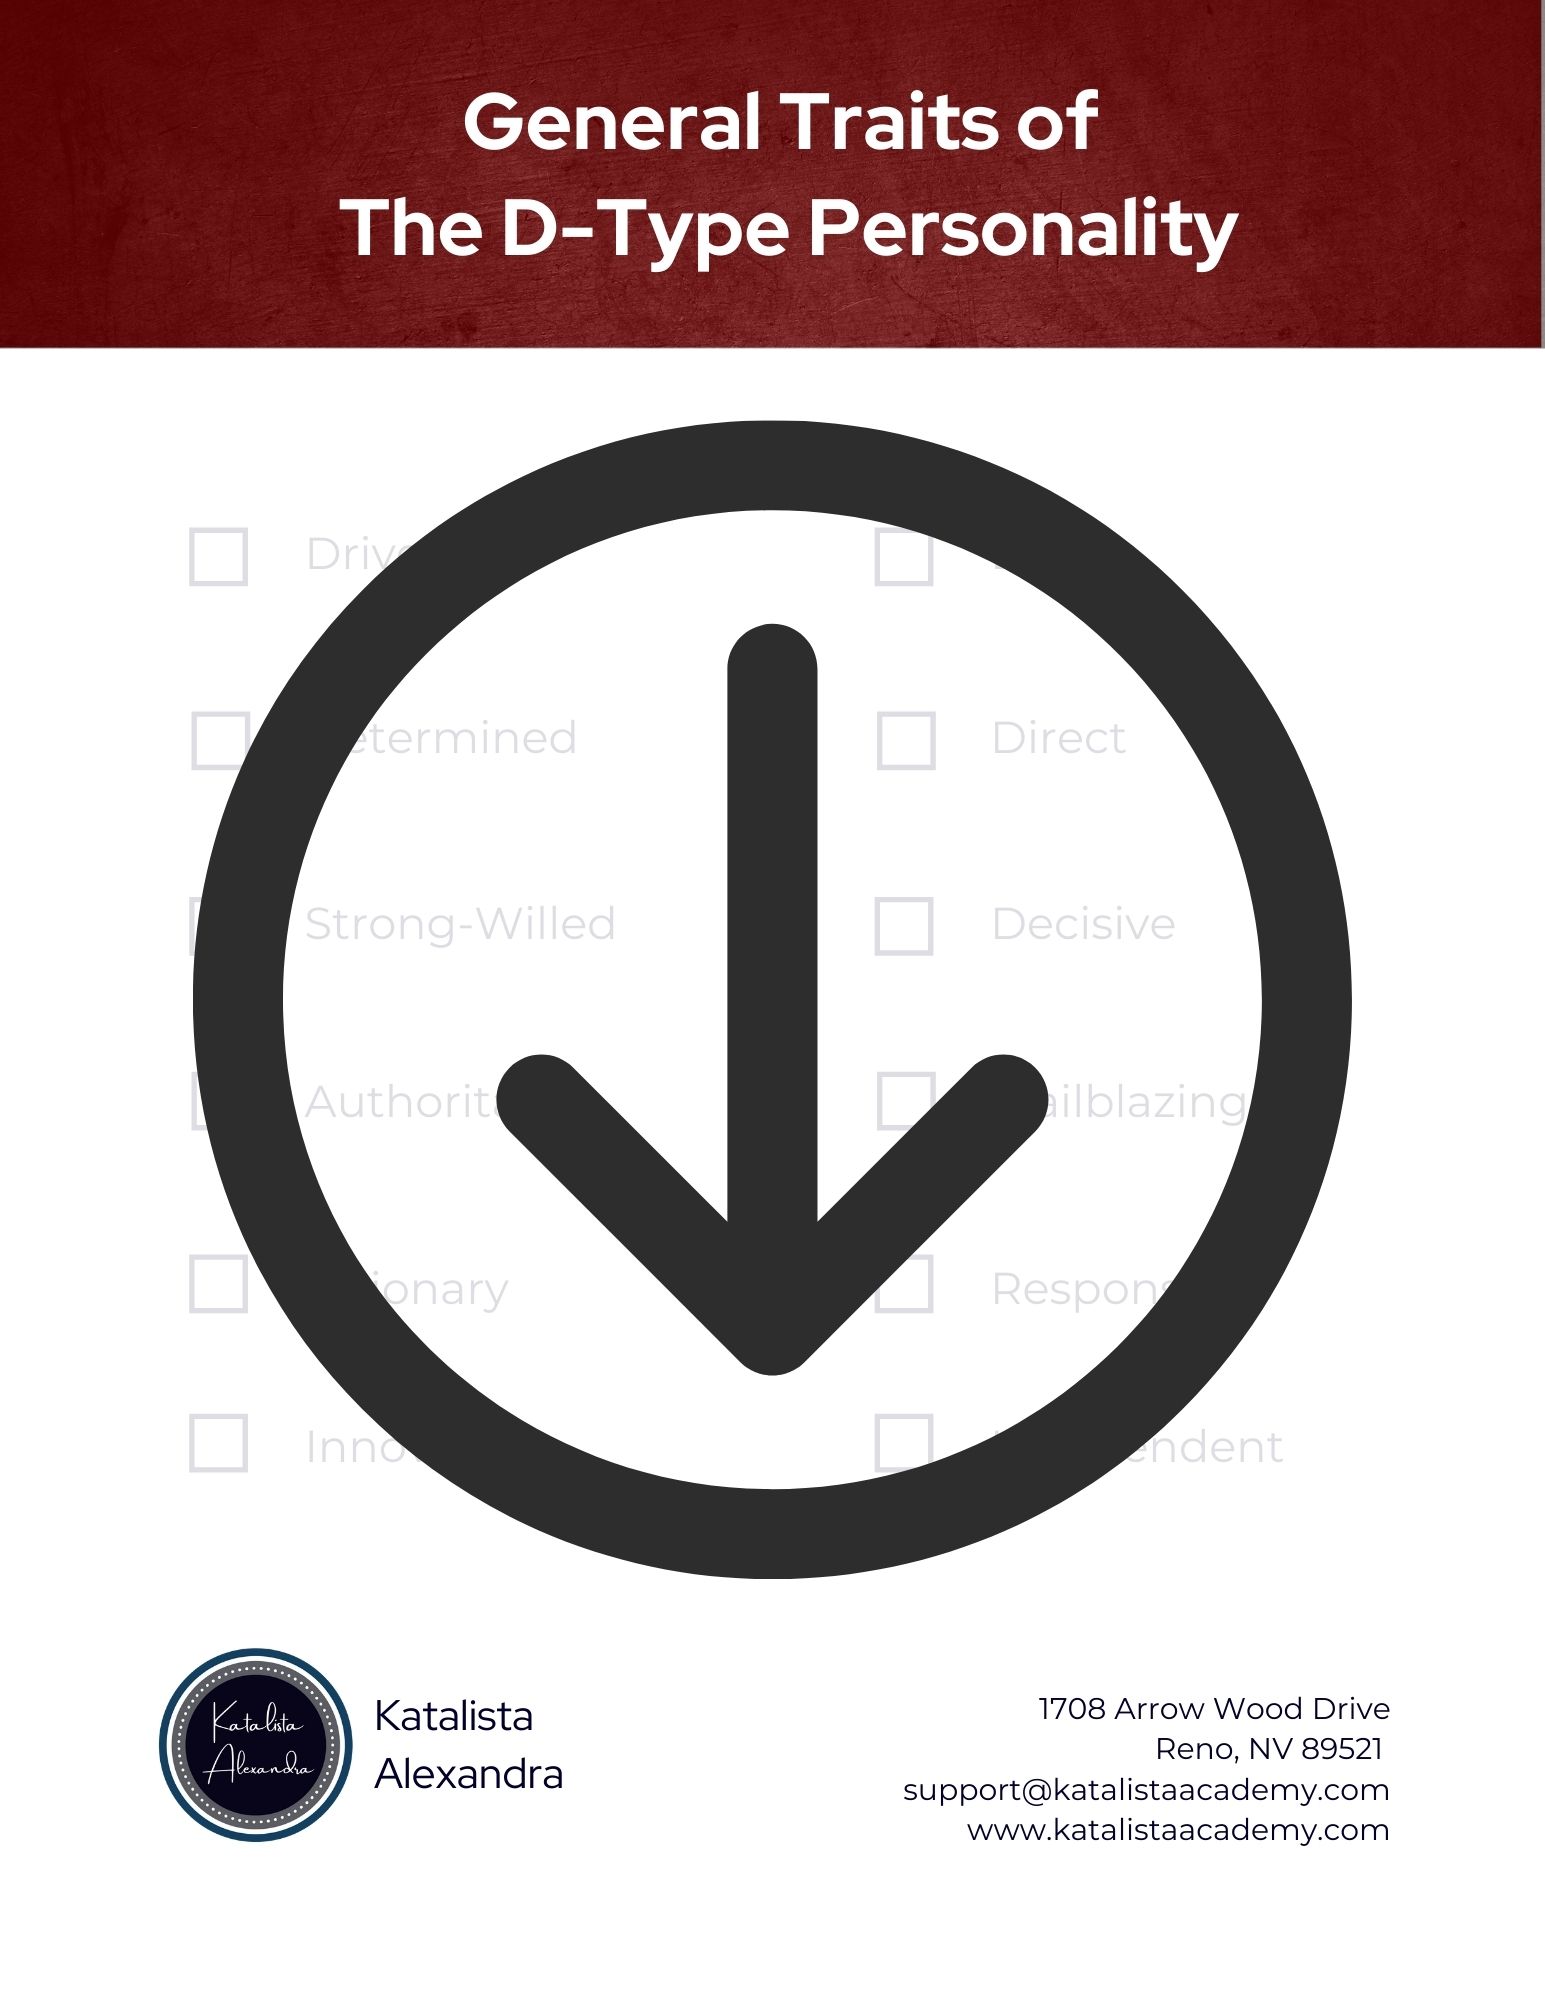 General Traits of the D-Type Personality